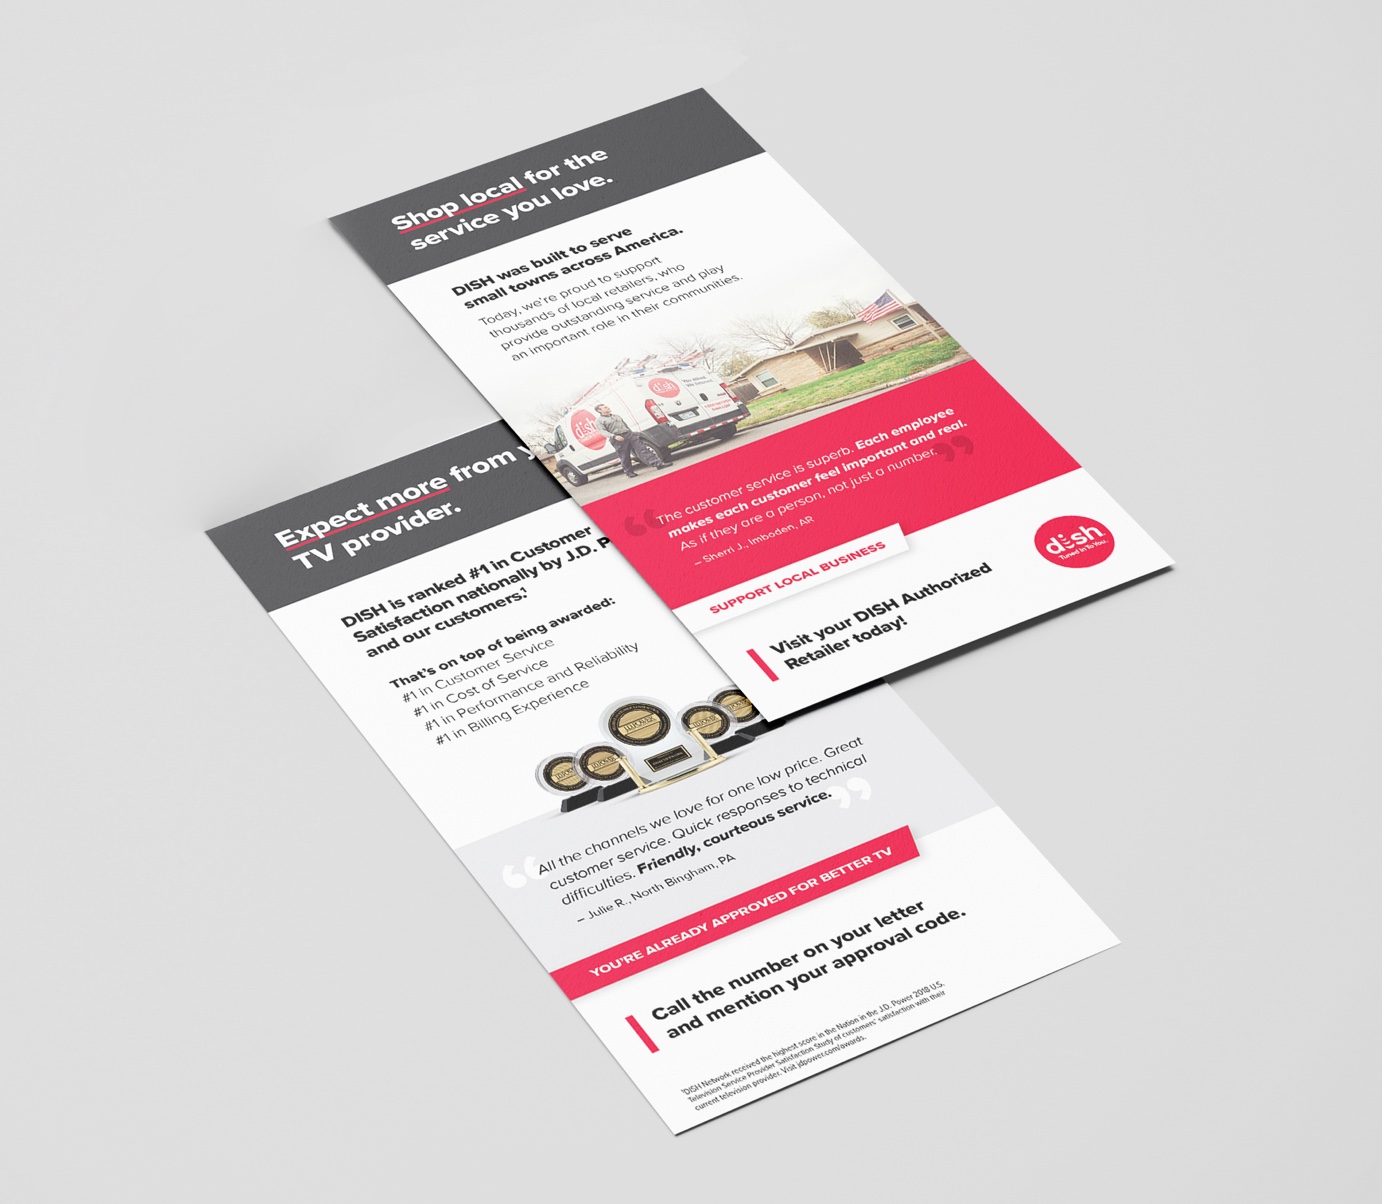 Double-sided brochure with information about cutomer service awards and local service.